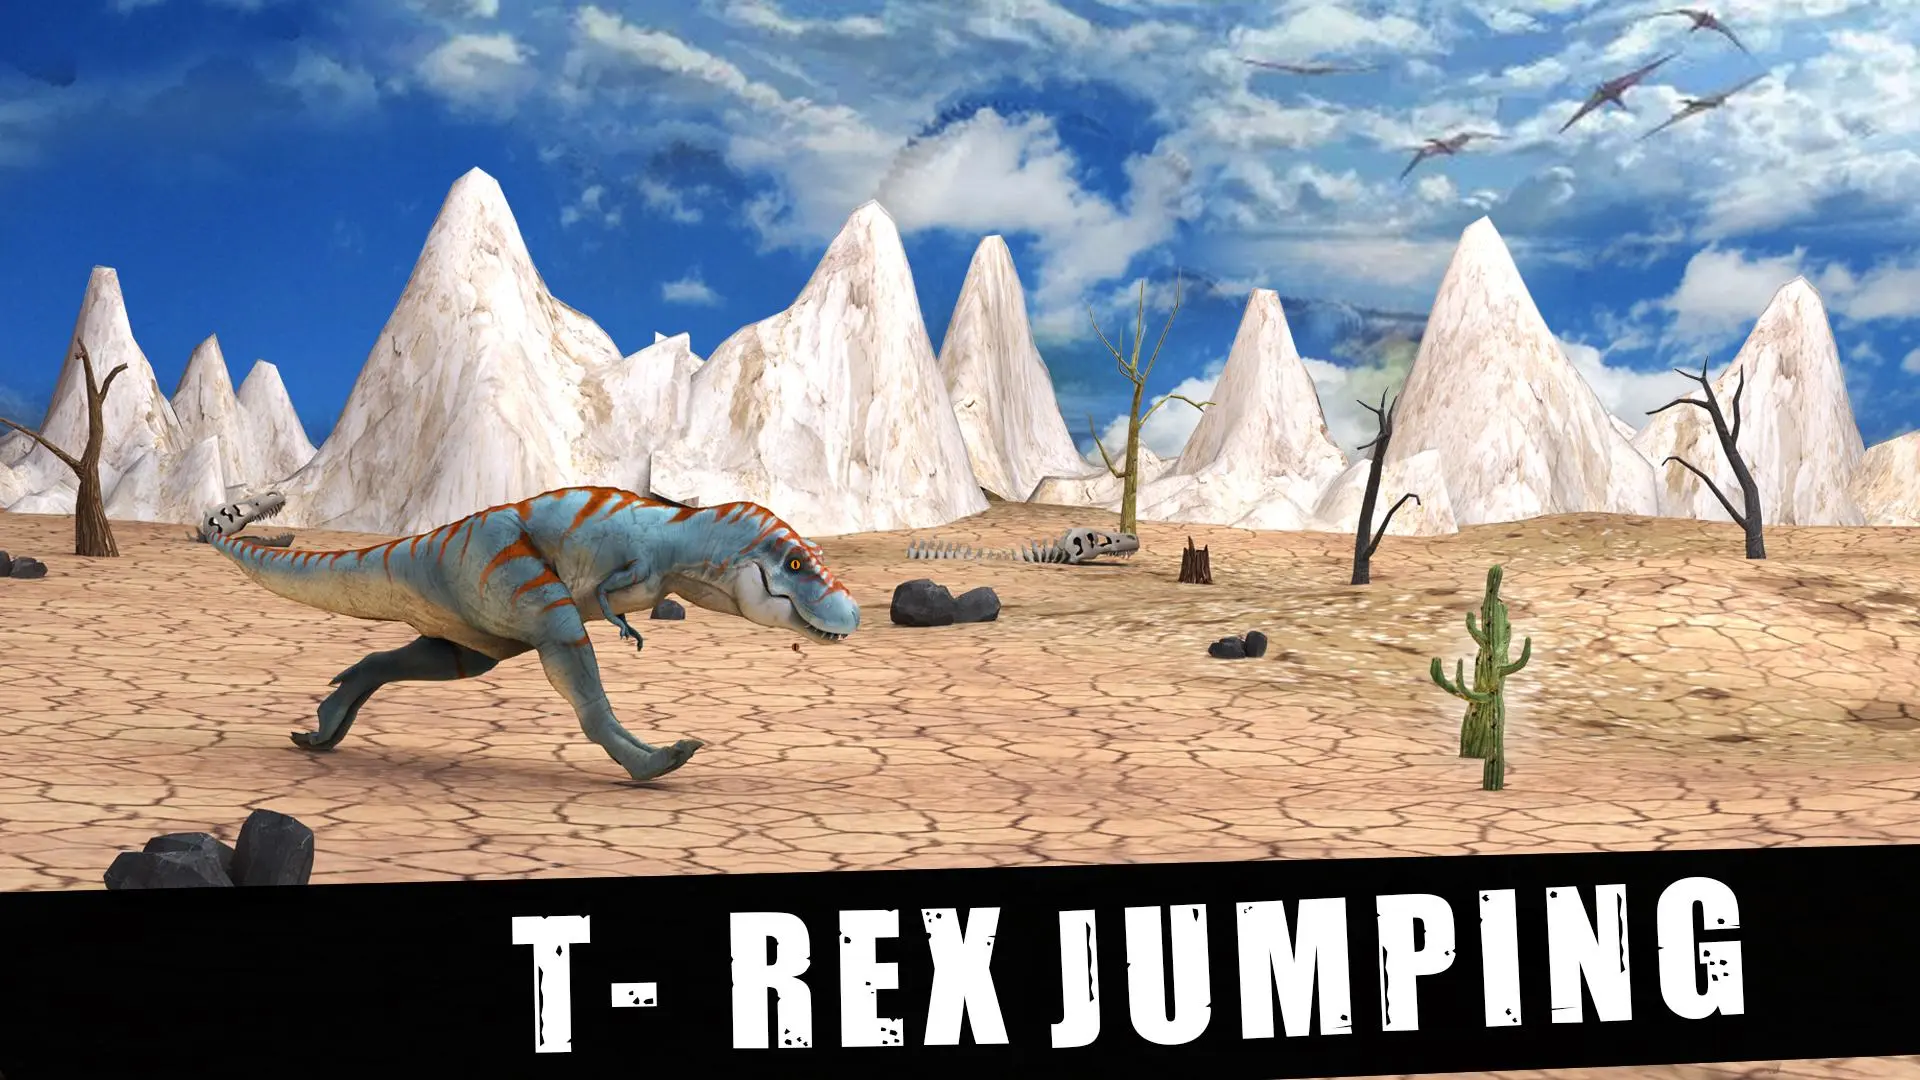 Download Dinosaur Run Game 3d android on PC